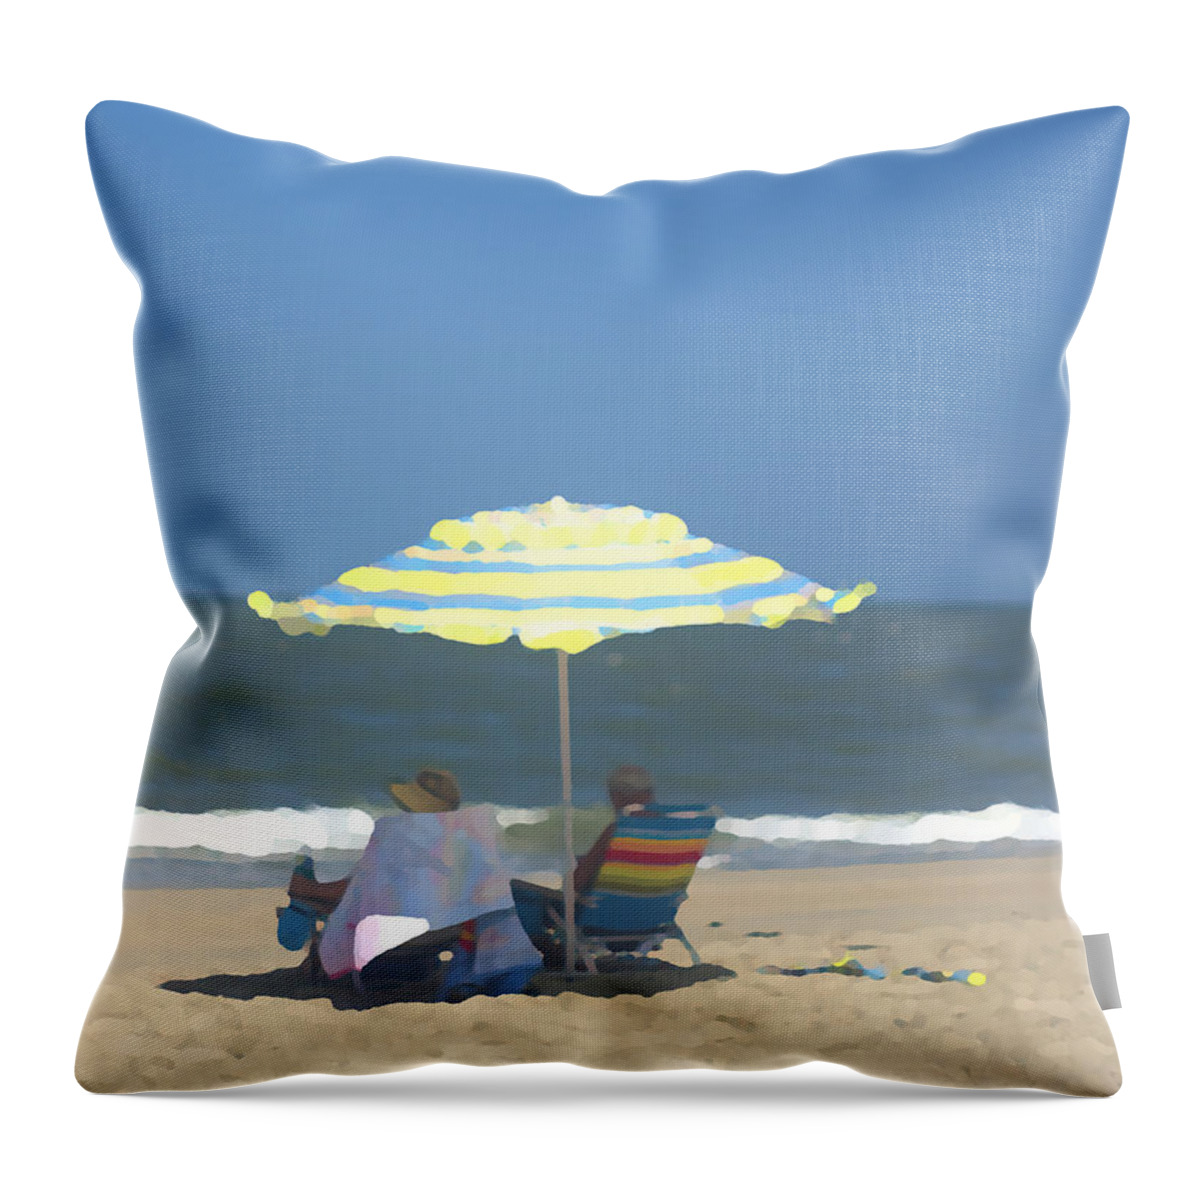 Chesapeake Bay Couple Throw Pillow featuring the photograph Relaxing On The Chesapeake Bay VA Beach by Suzanne Powers